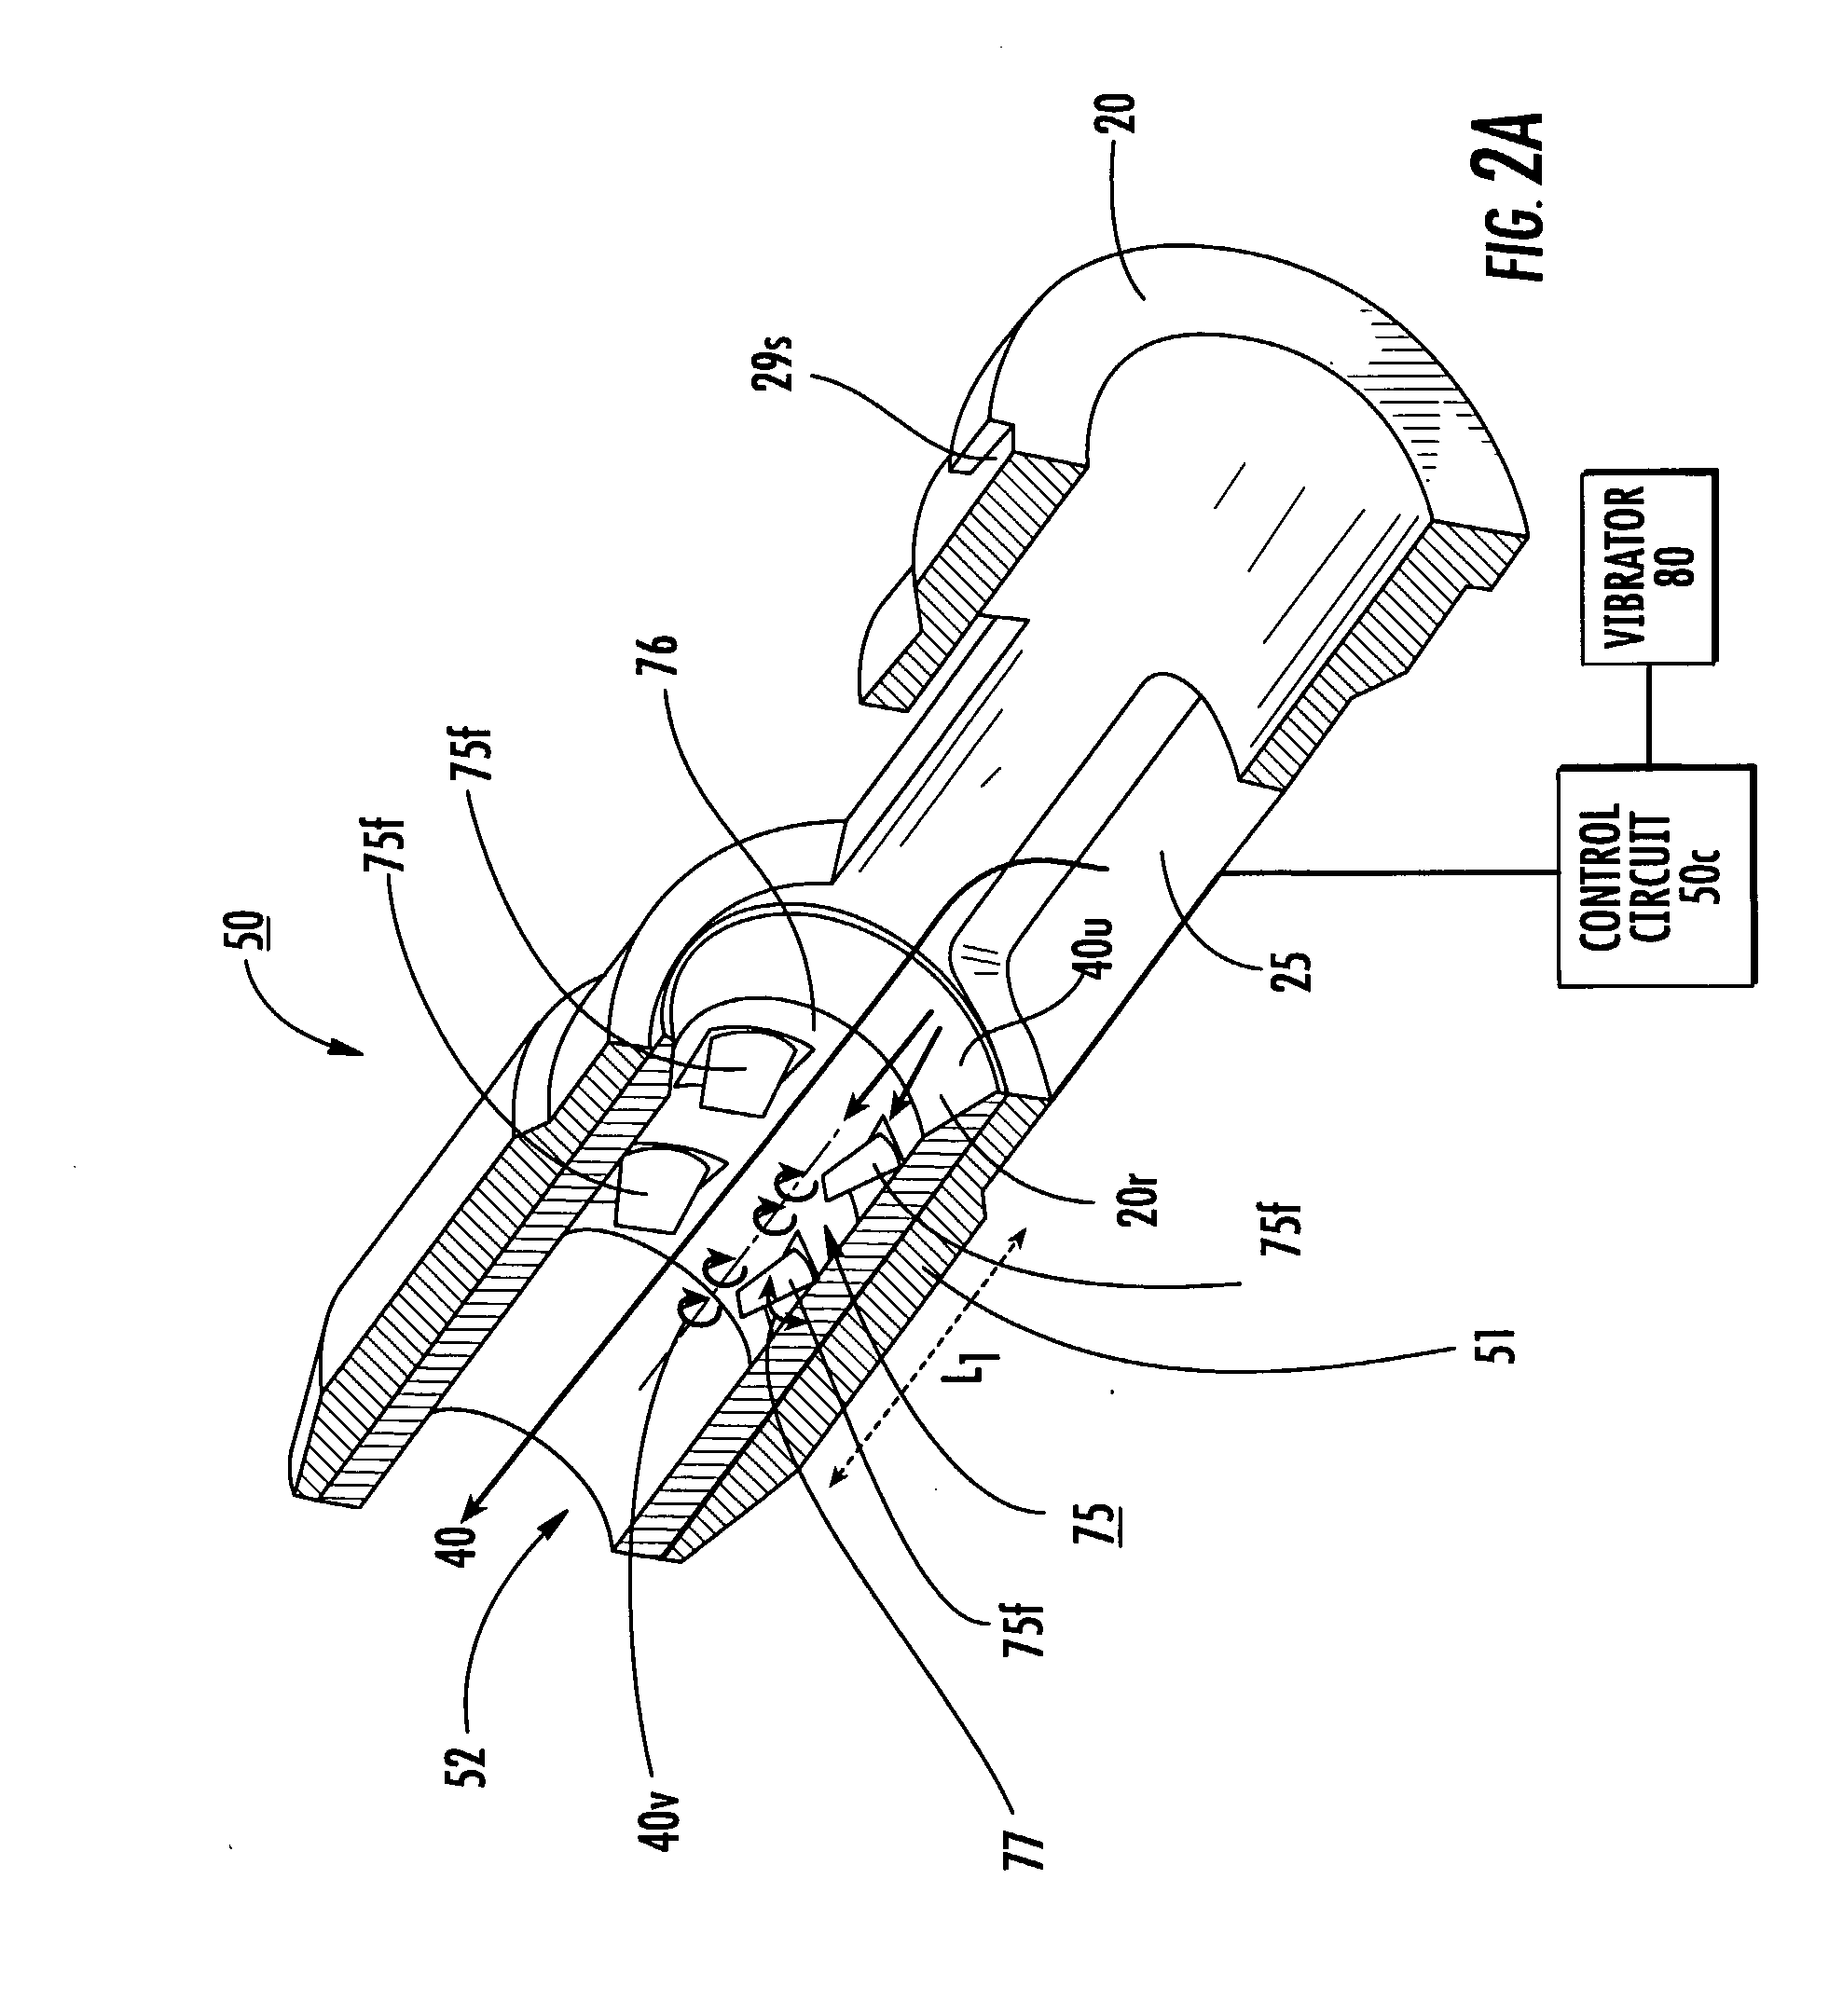 Dry Powder Inhalers that Inhibit Agglomeration, Related Devices and Methods